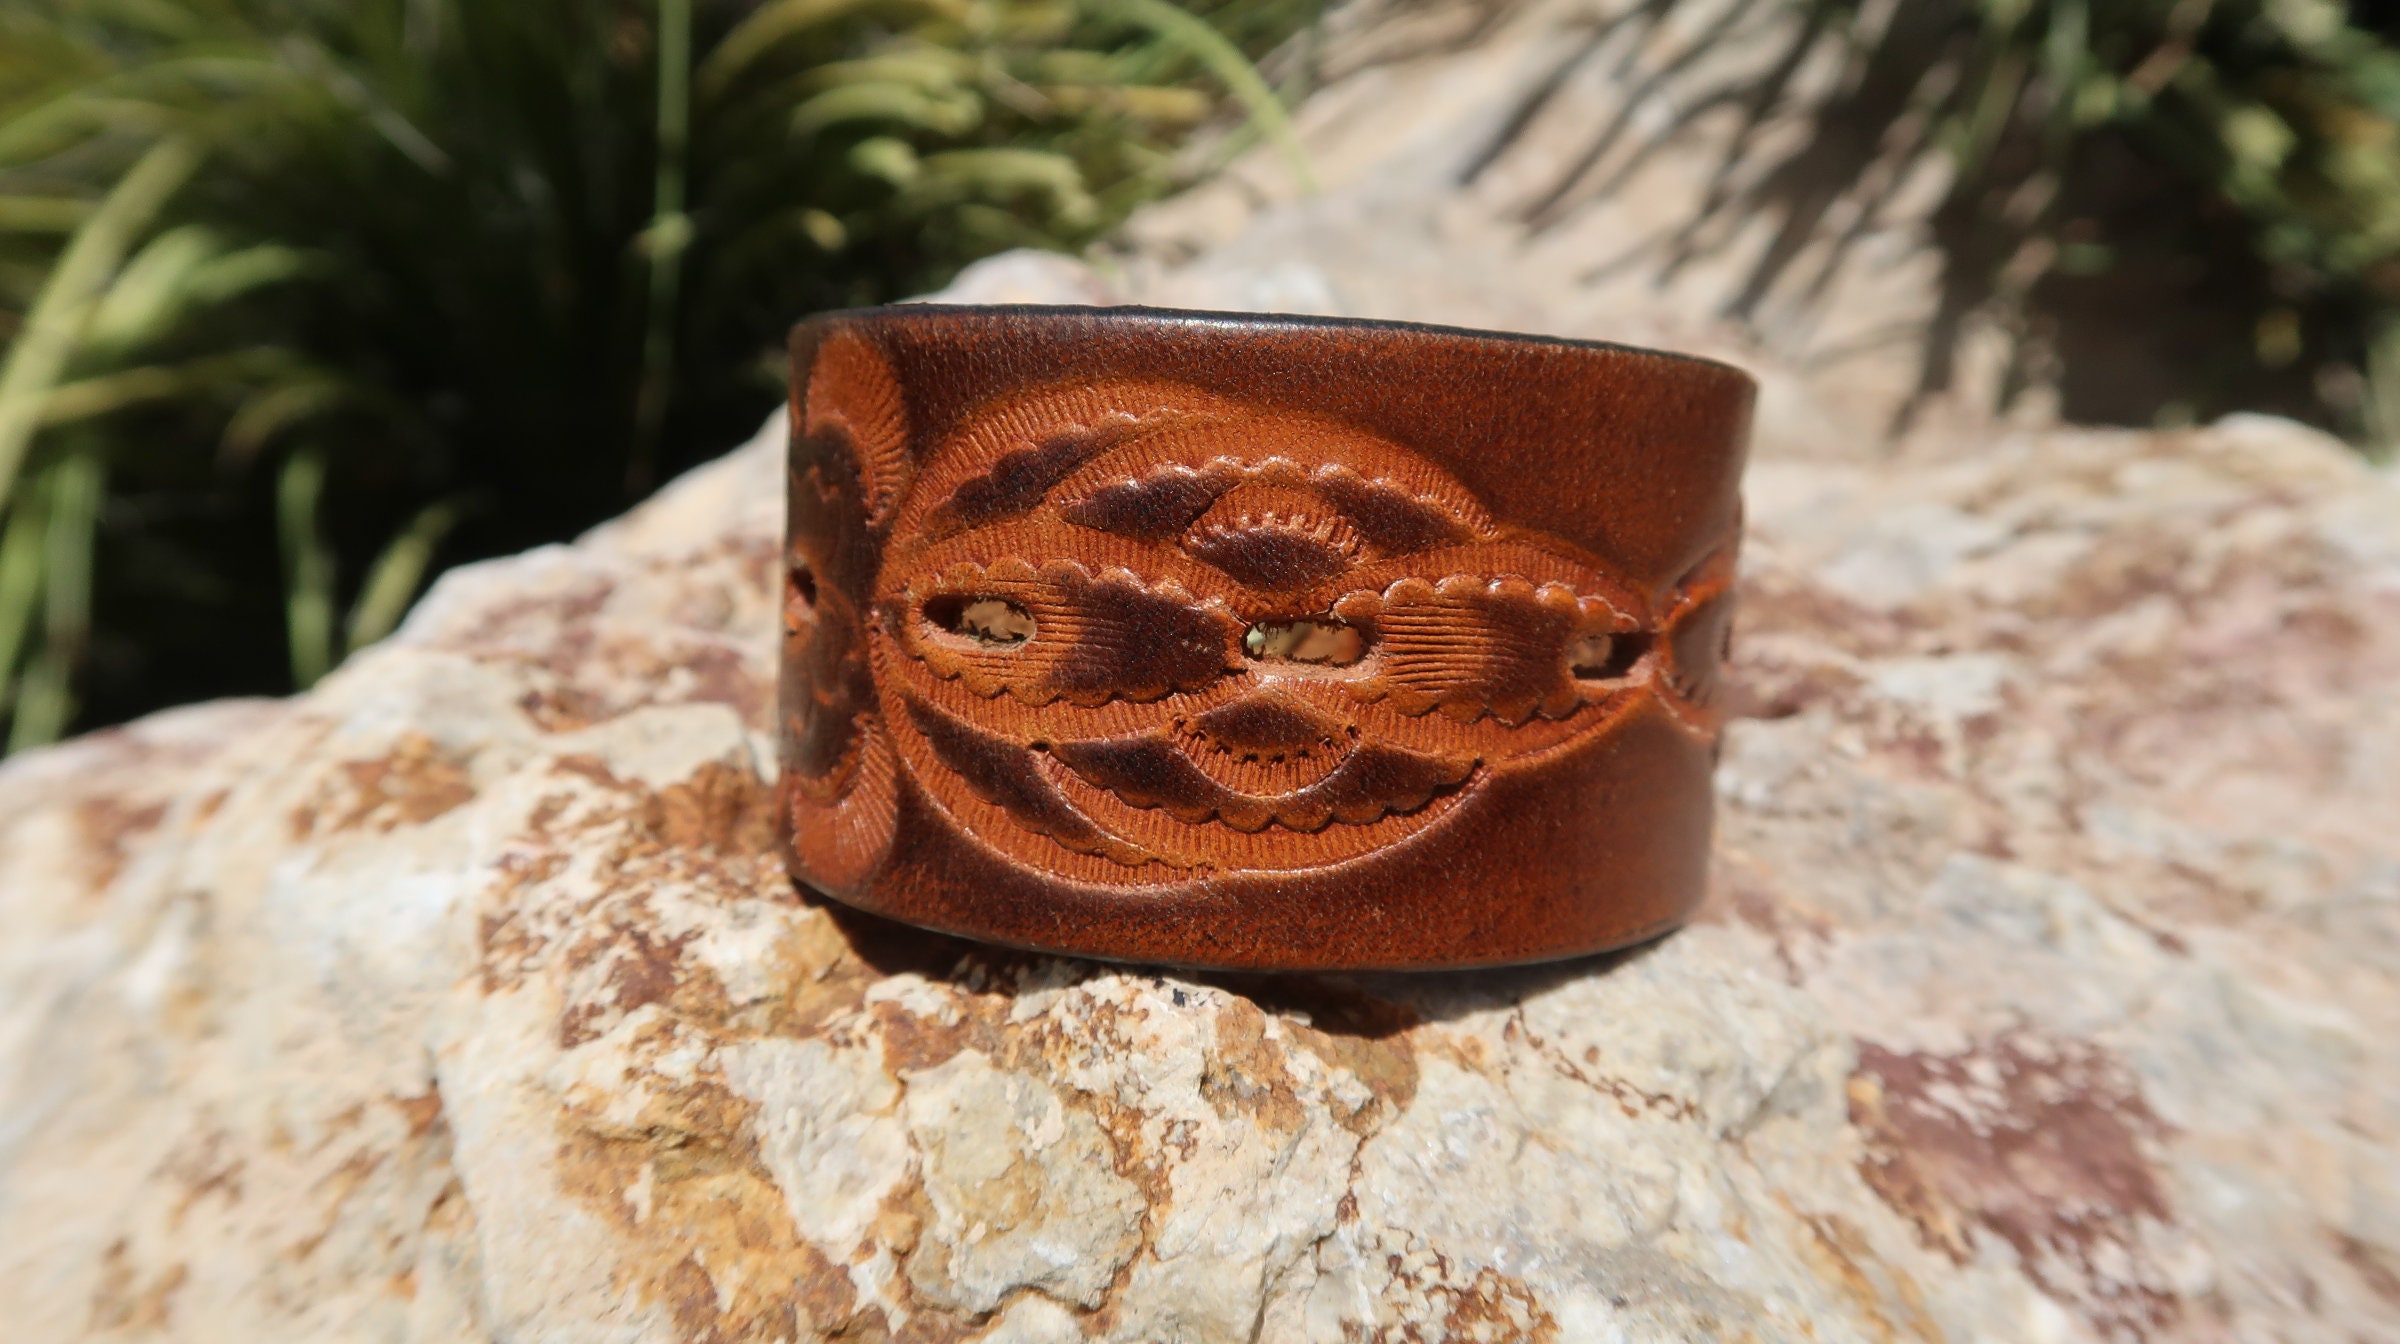 cuffrecycled leather cuff braceletwomans cuffleather cuffrepurposed leather cuff braceletflower cuffstamped painted flower cuffC265